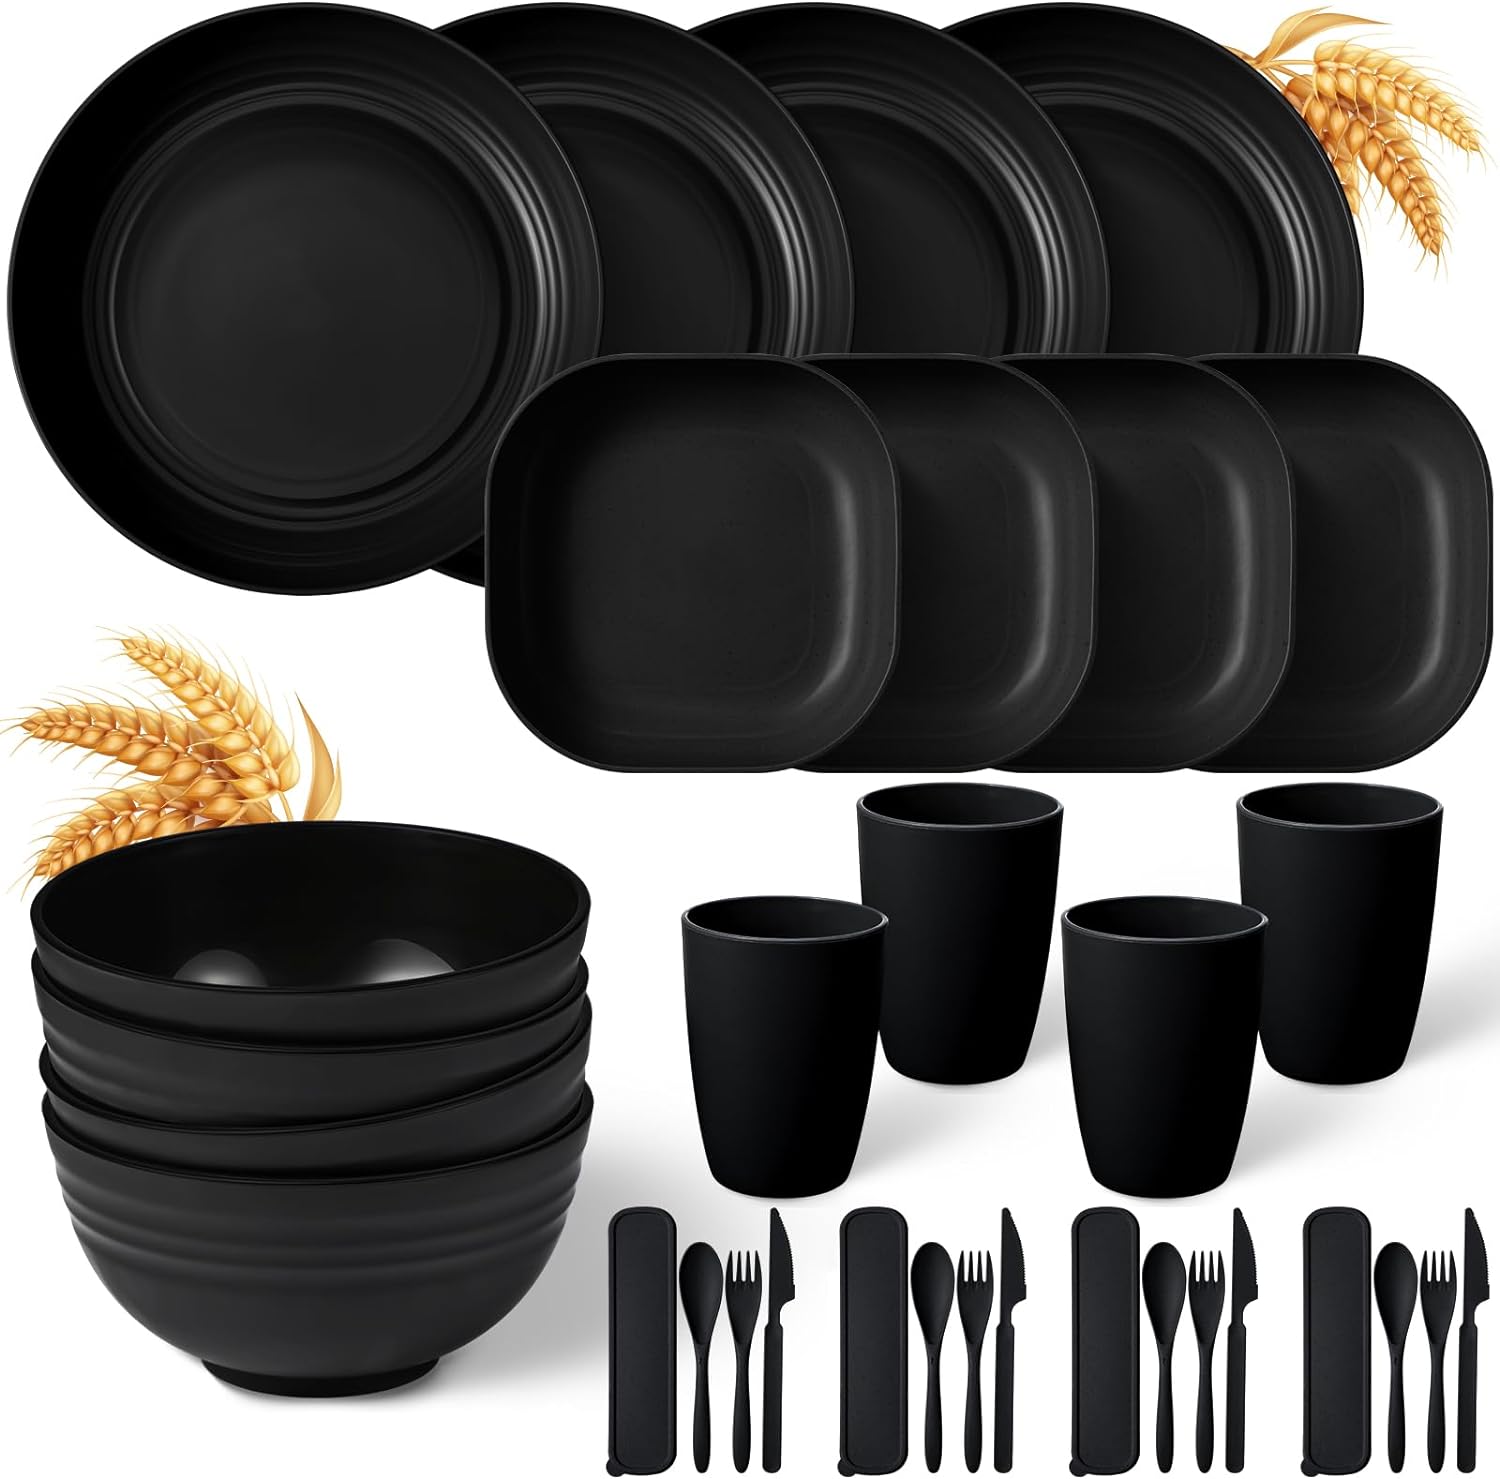 Wheat Straw Dinnerware Sets Unbreakable Plates and Bowls Microwave Safe Plastic Lightweight Knives Forks Spoons for Kitchen Outdoor Camping Party(Black, 32 Pcs)